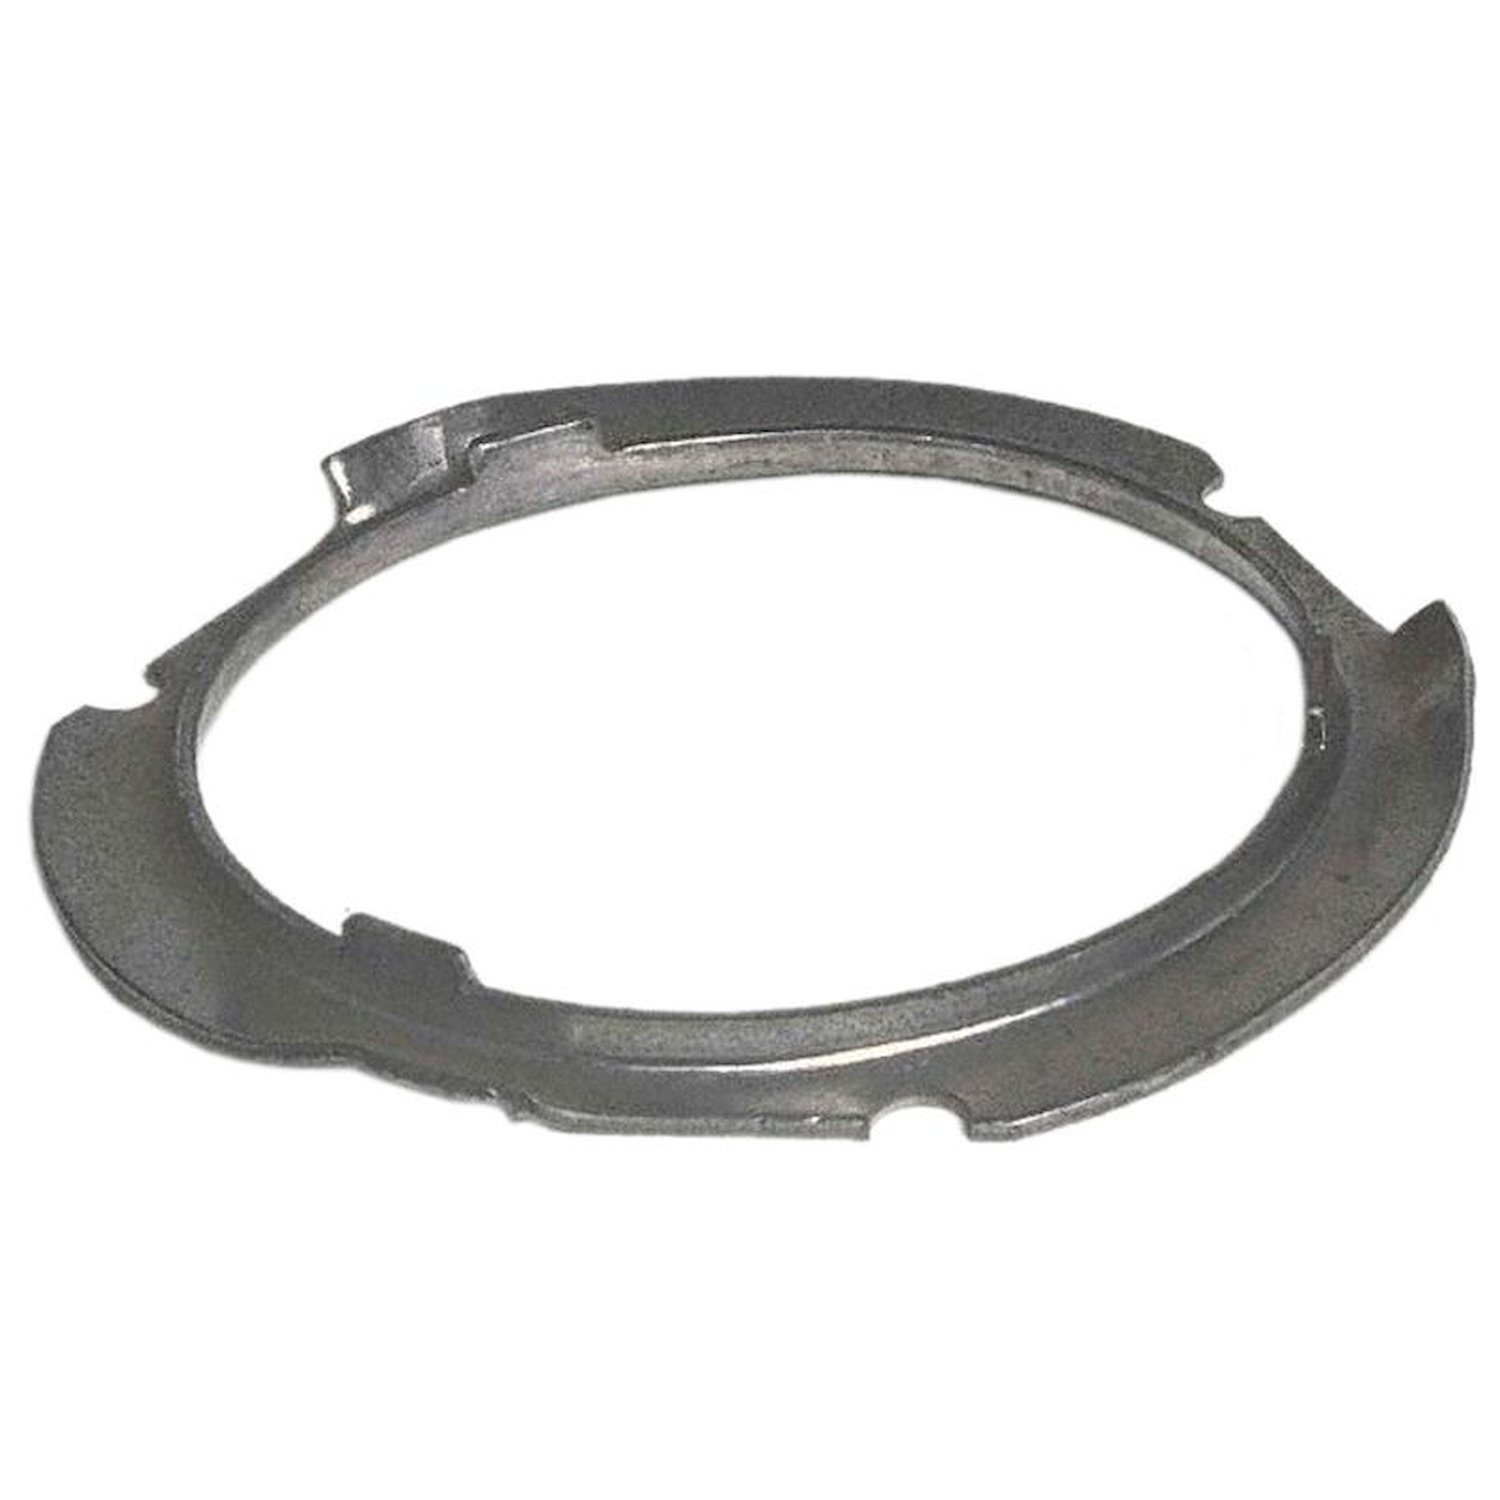 Fuel Tank Lock Ring for 1981-1995 Chrysler/Dodge/Plymouth